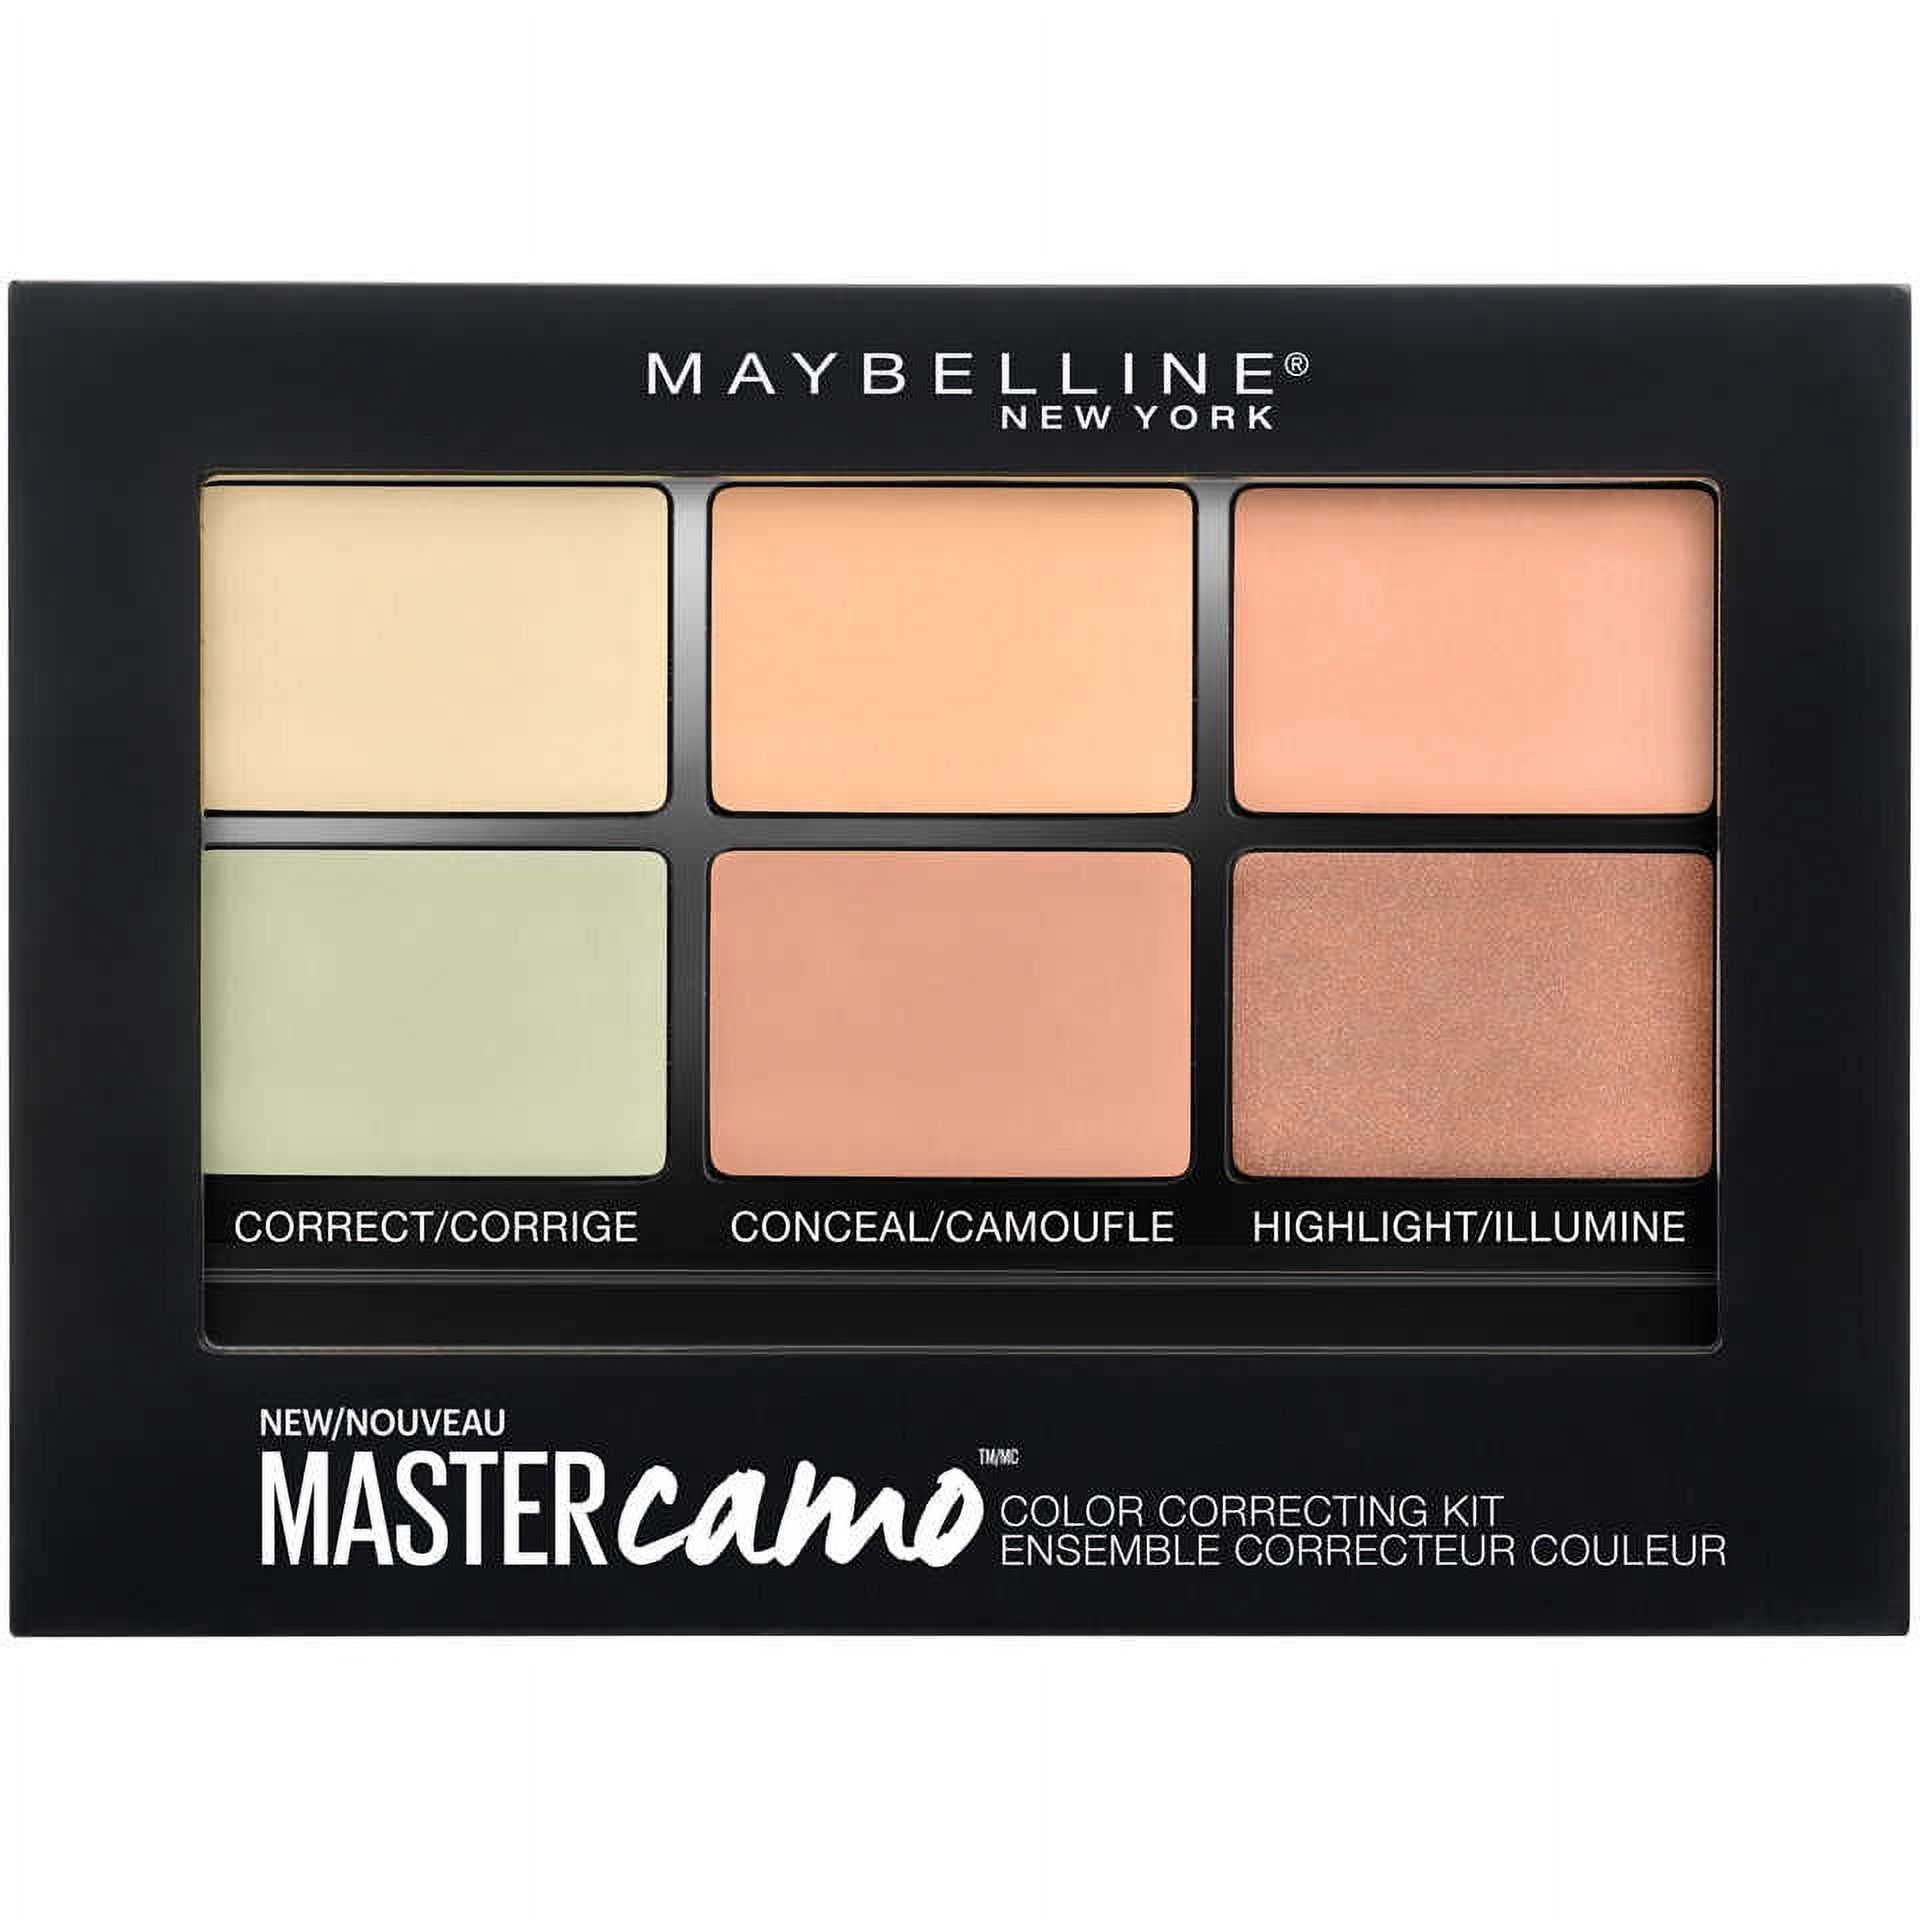 Maybelline New York Facestudio Master Camo Color Correcting Kit - image 4 of 6